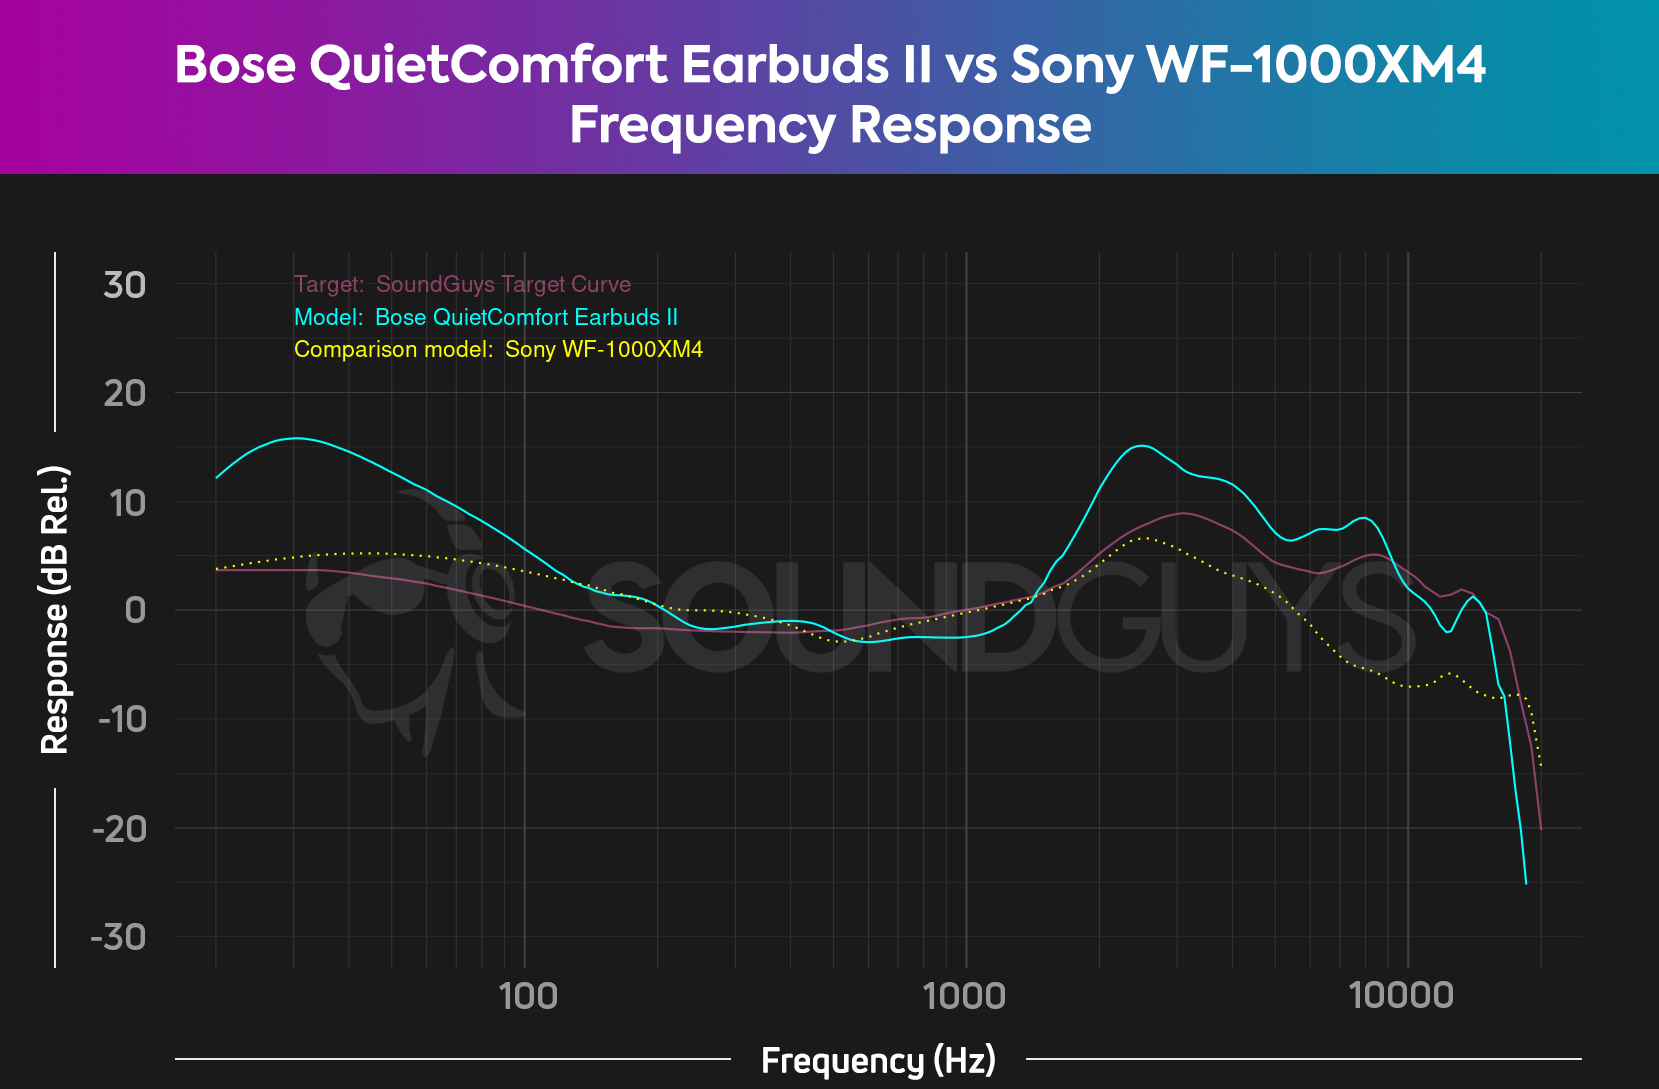 A chart comparing the frequency response of the Bose QuietComfort Earbuds II and the Sony WF-1000XM4, which shows how different the bass response of the two is.